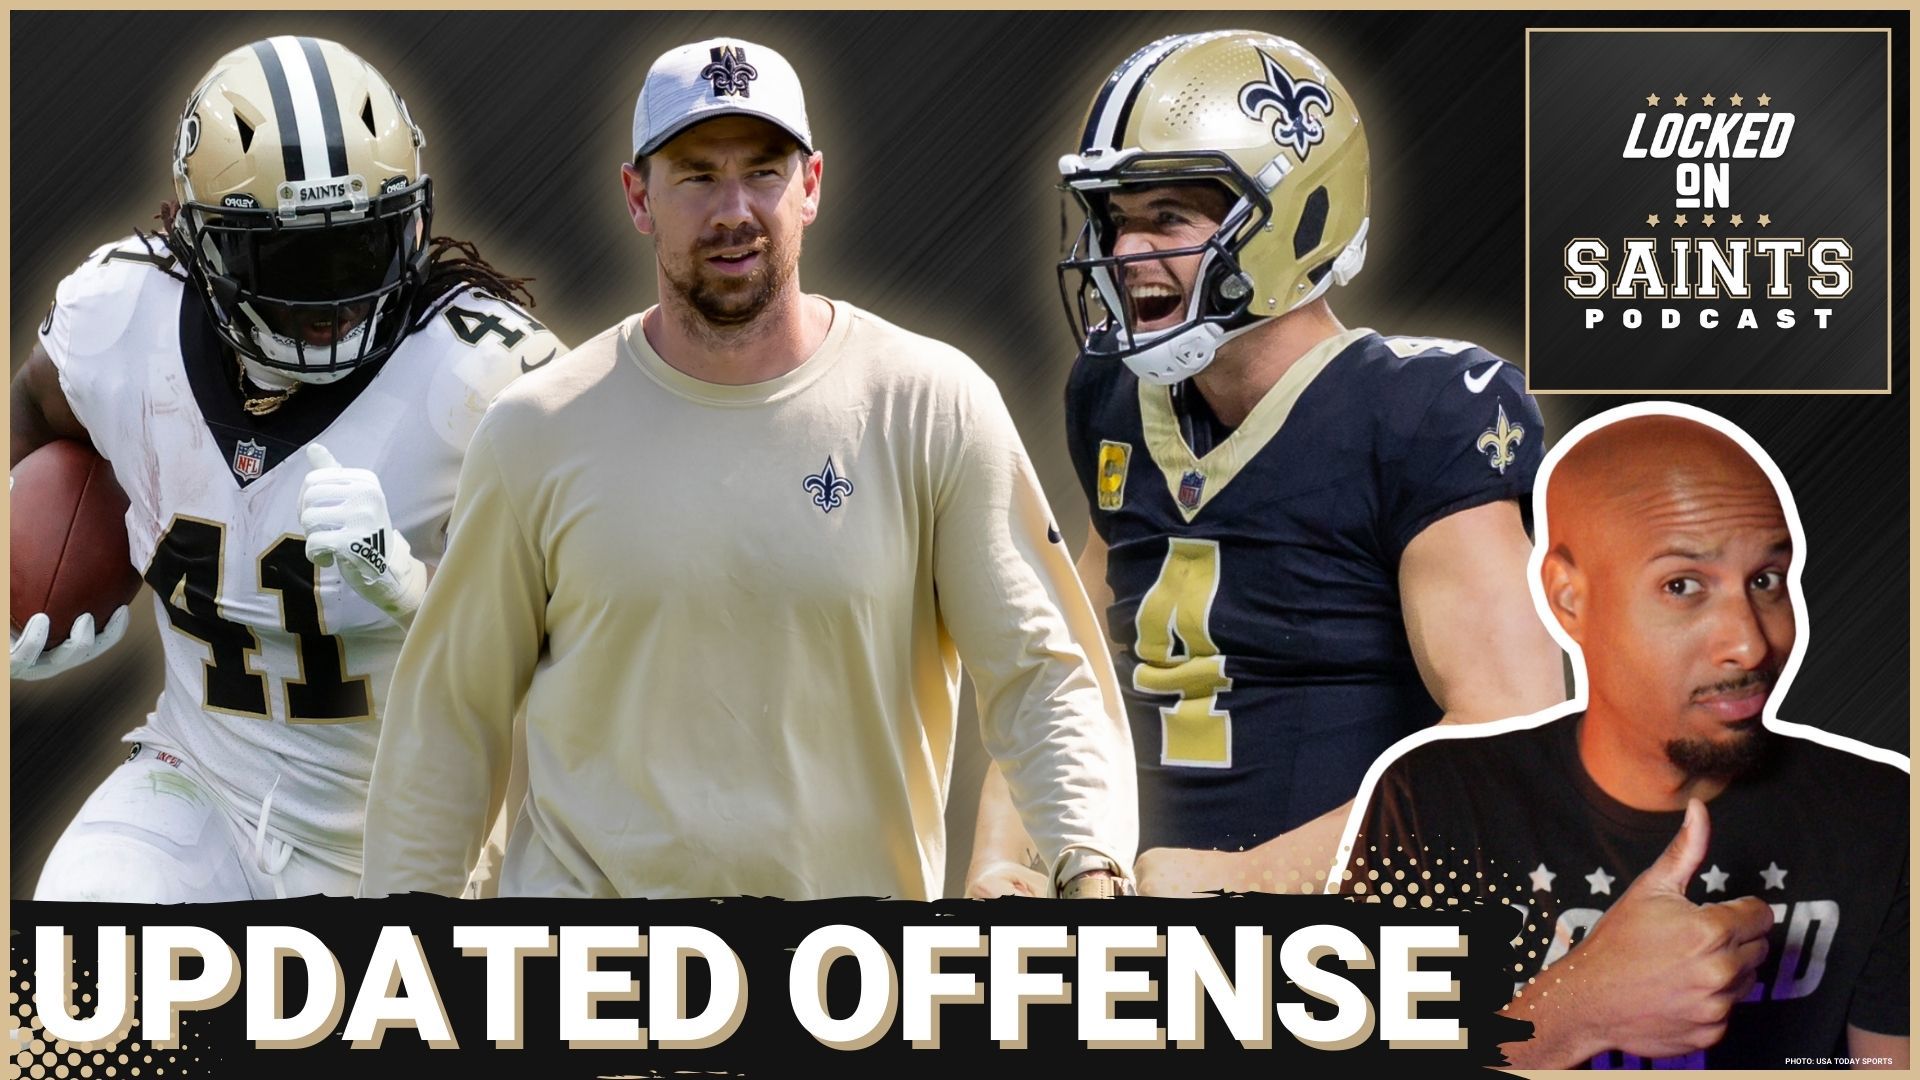 The strategic shifts in the New Orleans Saints' offense with new OC Klint Kubiak as the new offensive coordinator should elevate Derek Carr and his weapons.